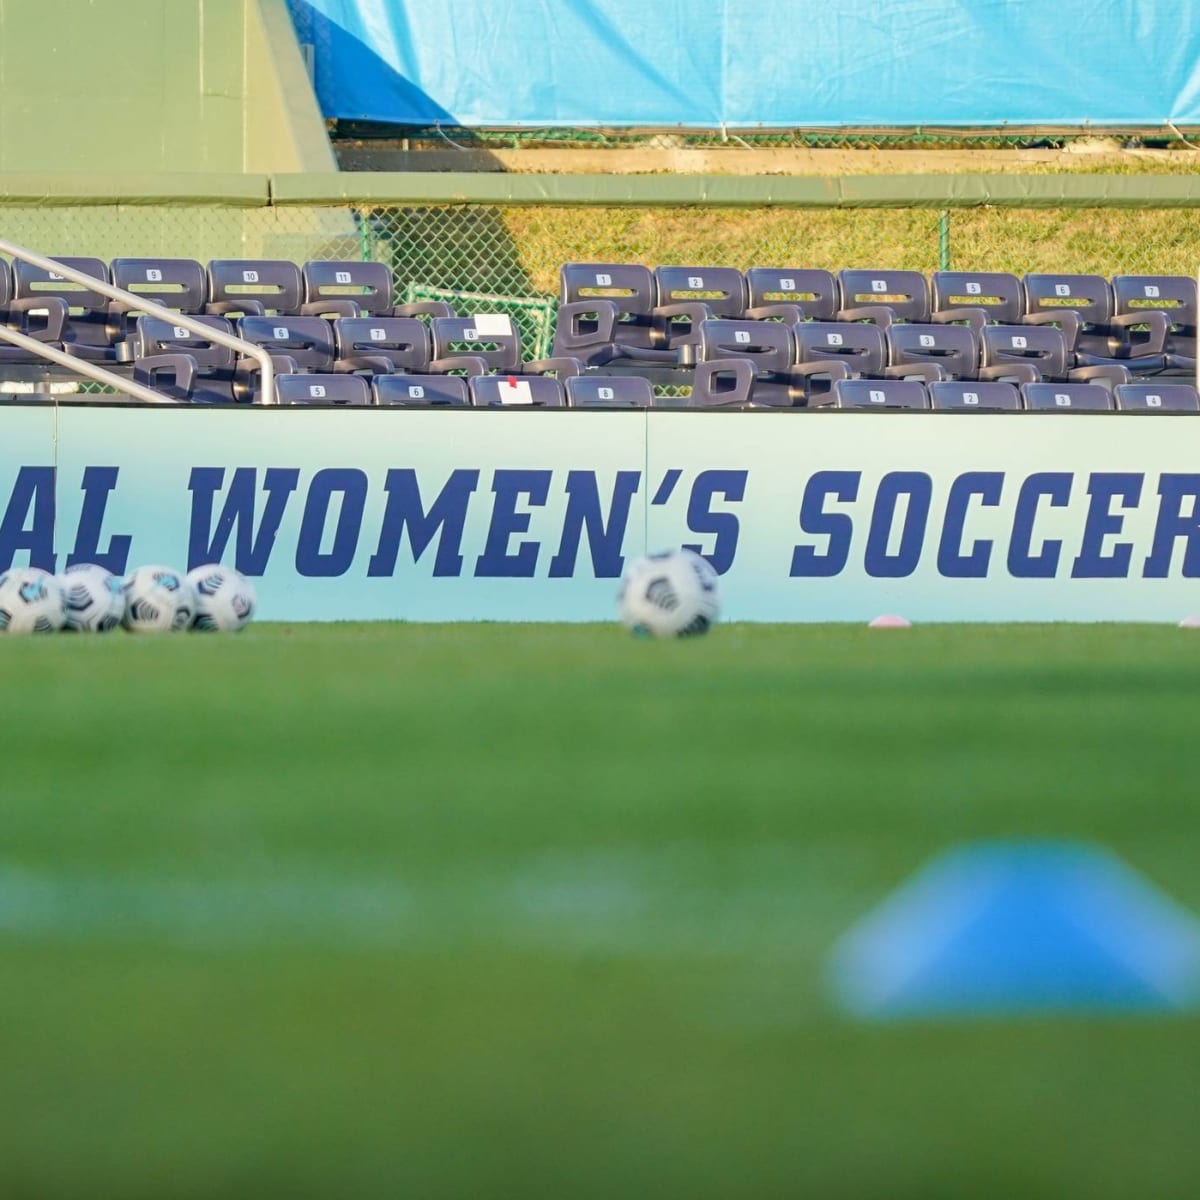 Will the NWSL expand to California again? A group of Bay Area